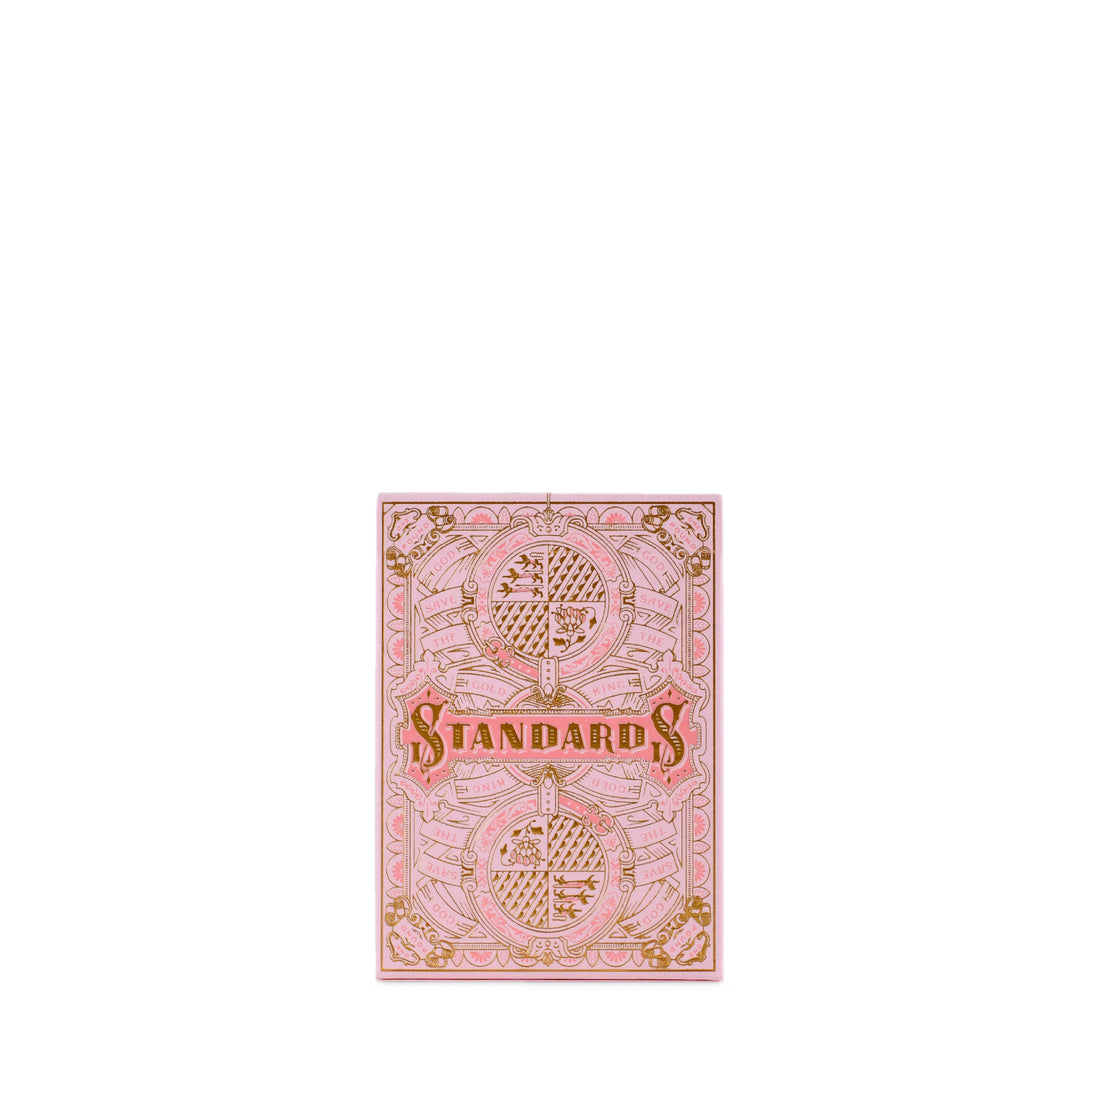 ART OF PLAY - PLAYING CARDS - STANDARDS PINK DECK